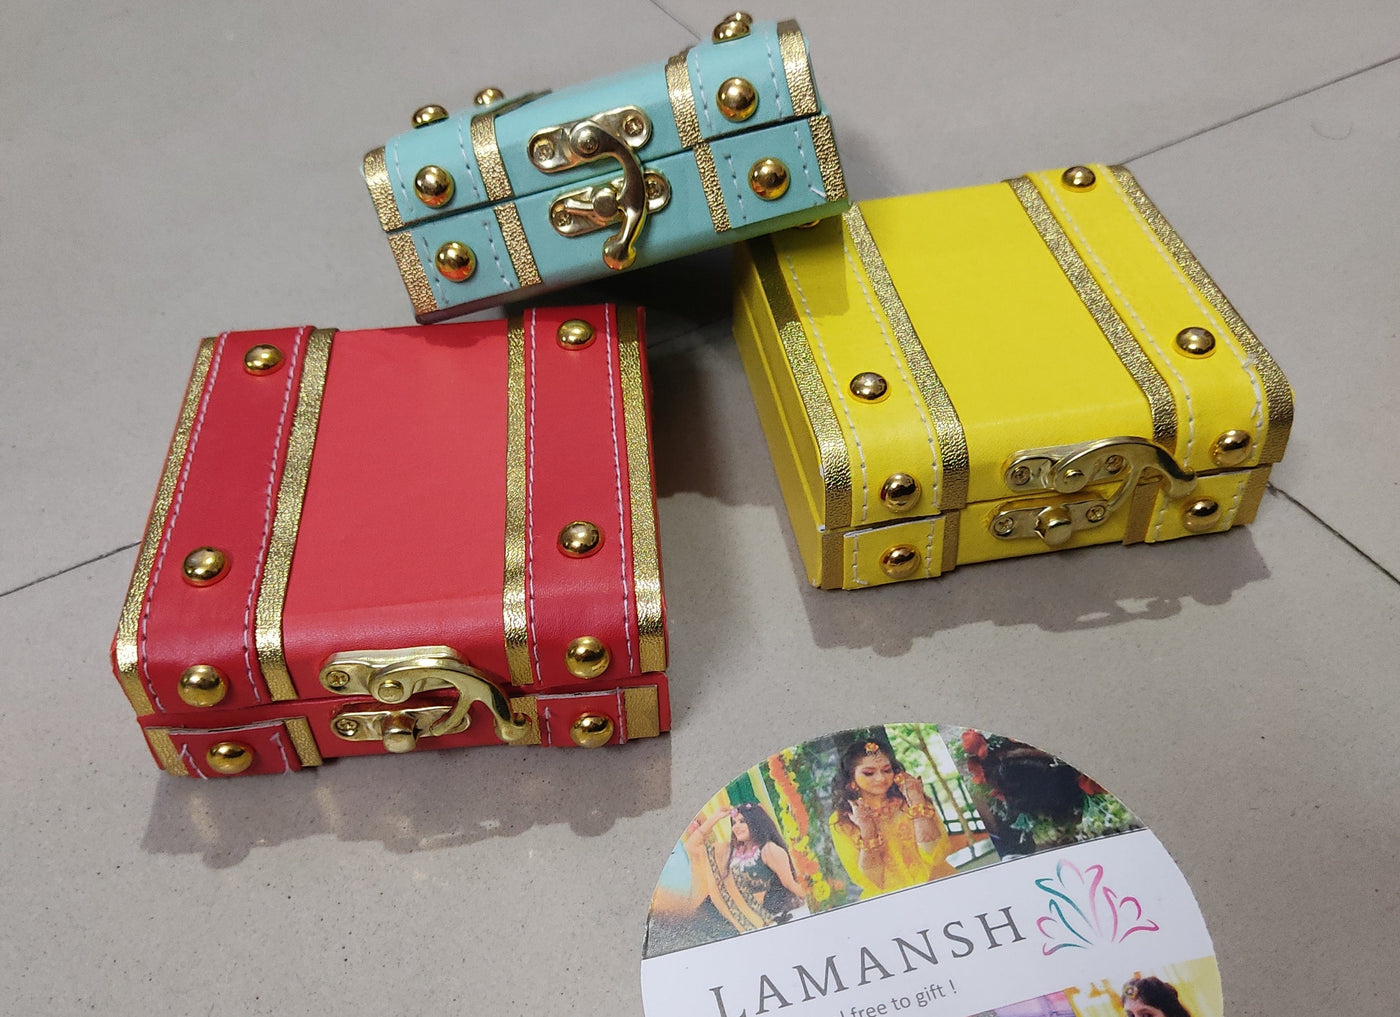 Lamansh leatherite boxes LAMANSH® (4*4*1.5 inch) Leatherette mini trunk boxes for gifting 🎁 / small leatherite lock boxes for wedding favors / cute gift ideas for family & friends